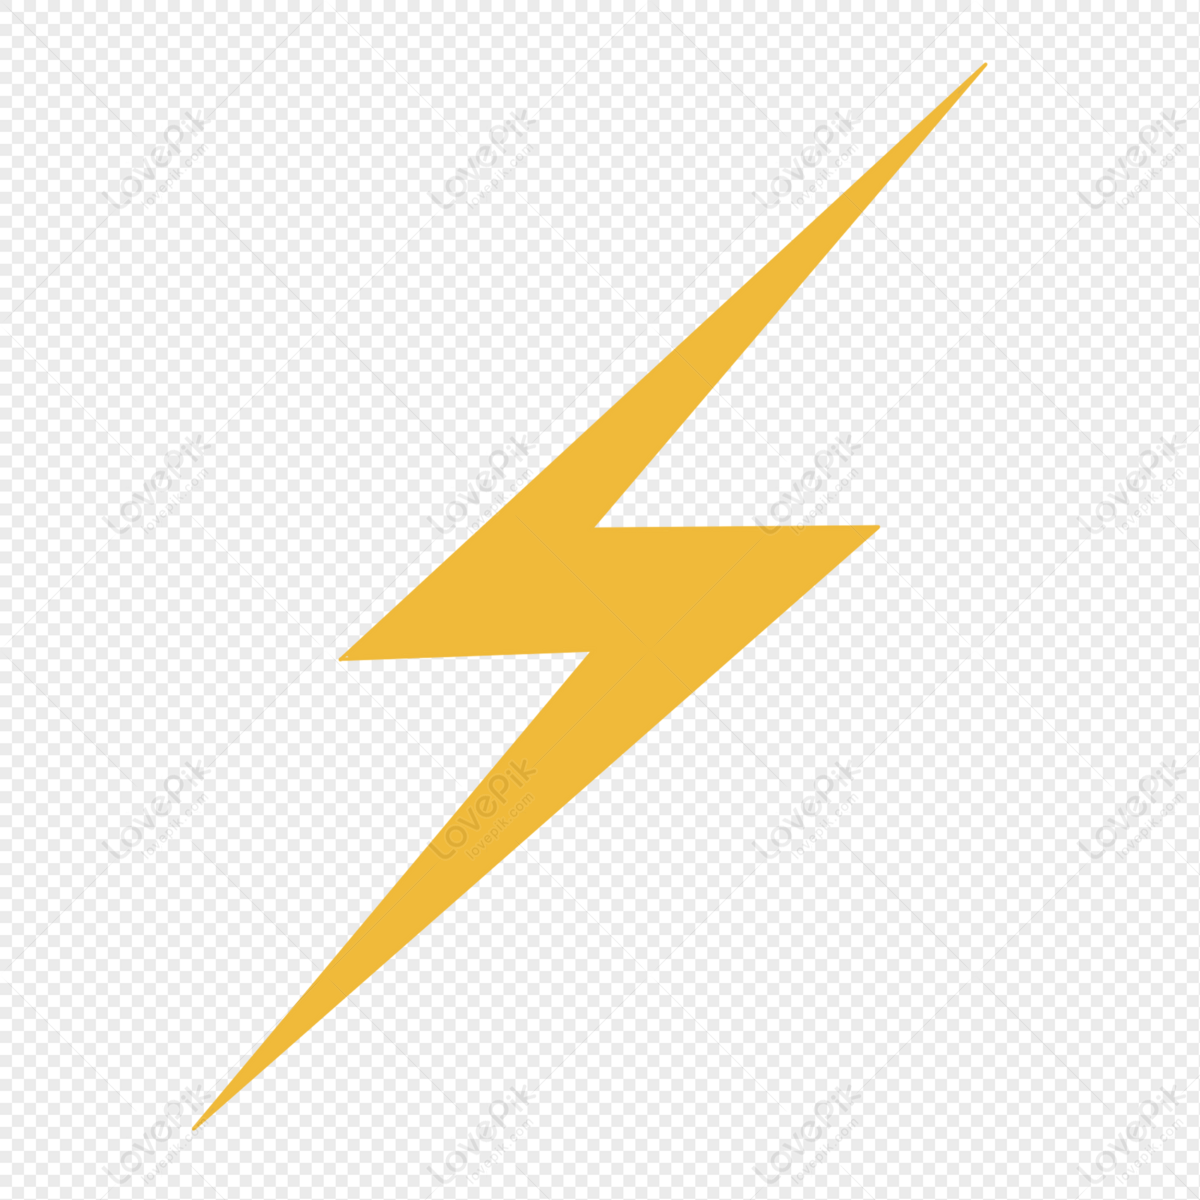 Yellow Lightning Icon PNG Image Free Download And Clipart Image For Free  Download - Lovepik | 401530941